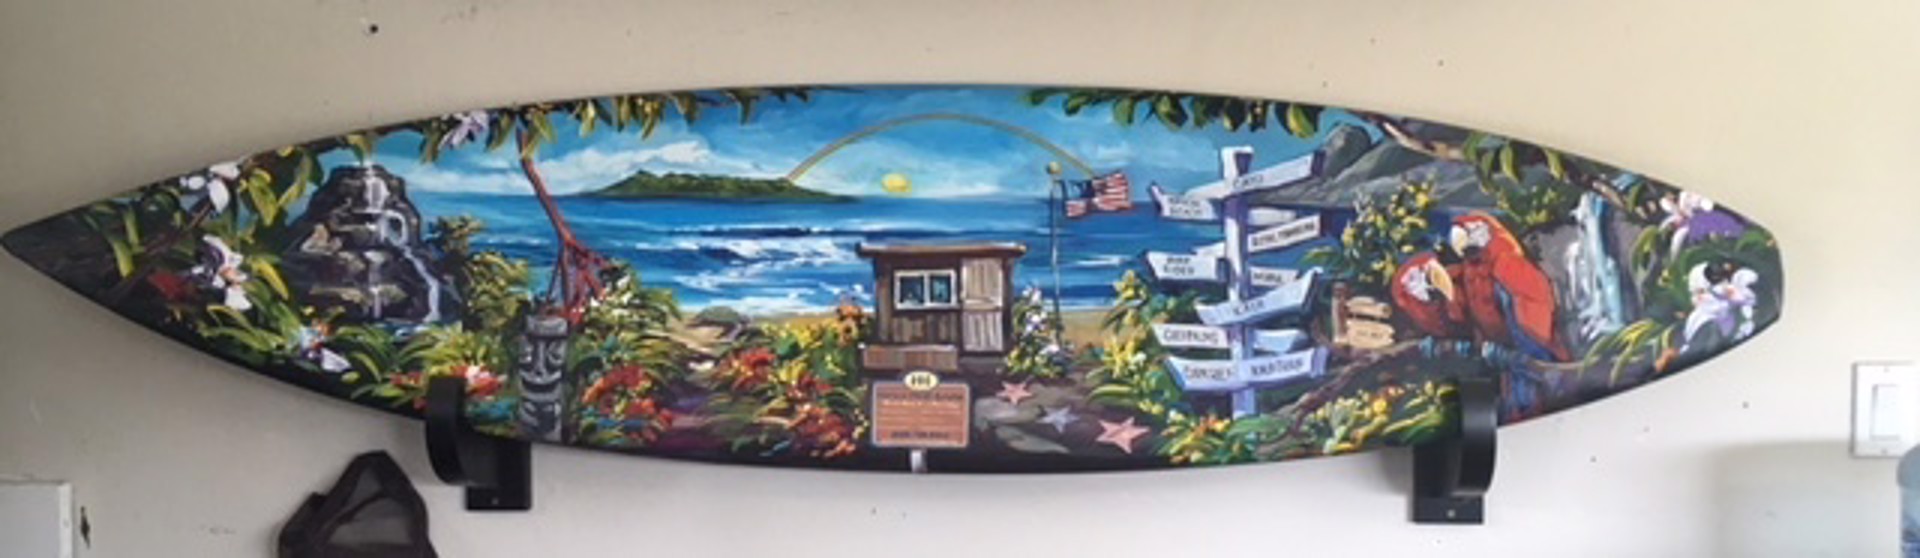 Commission Surfboard by | Bill Wyland Galleries Lahaina LLC